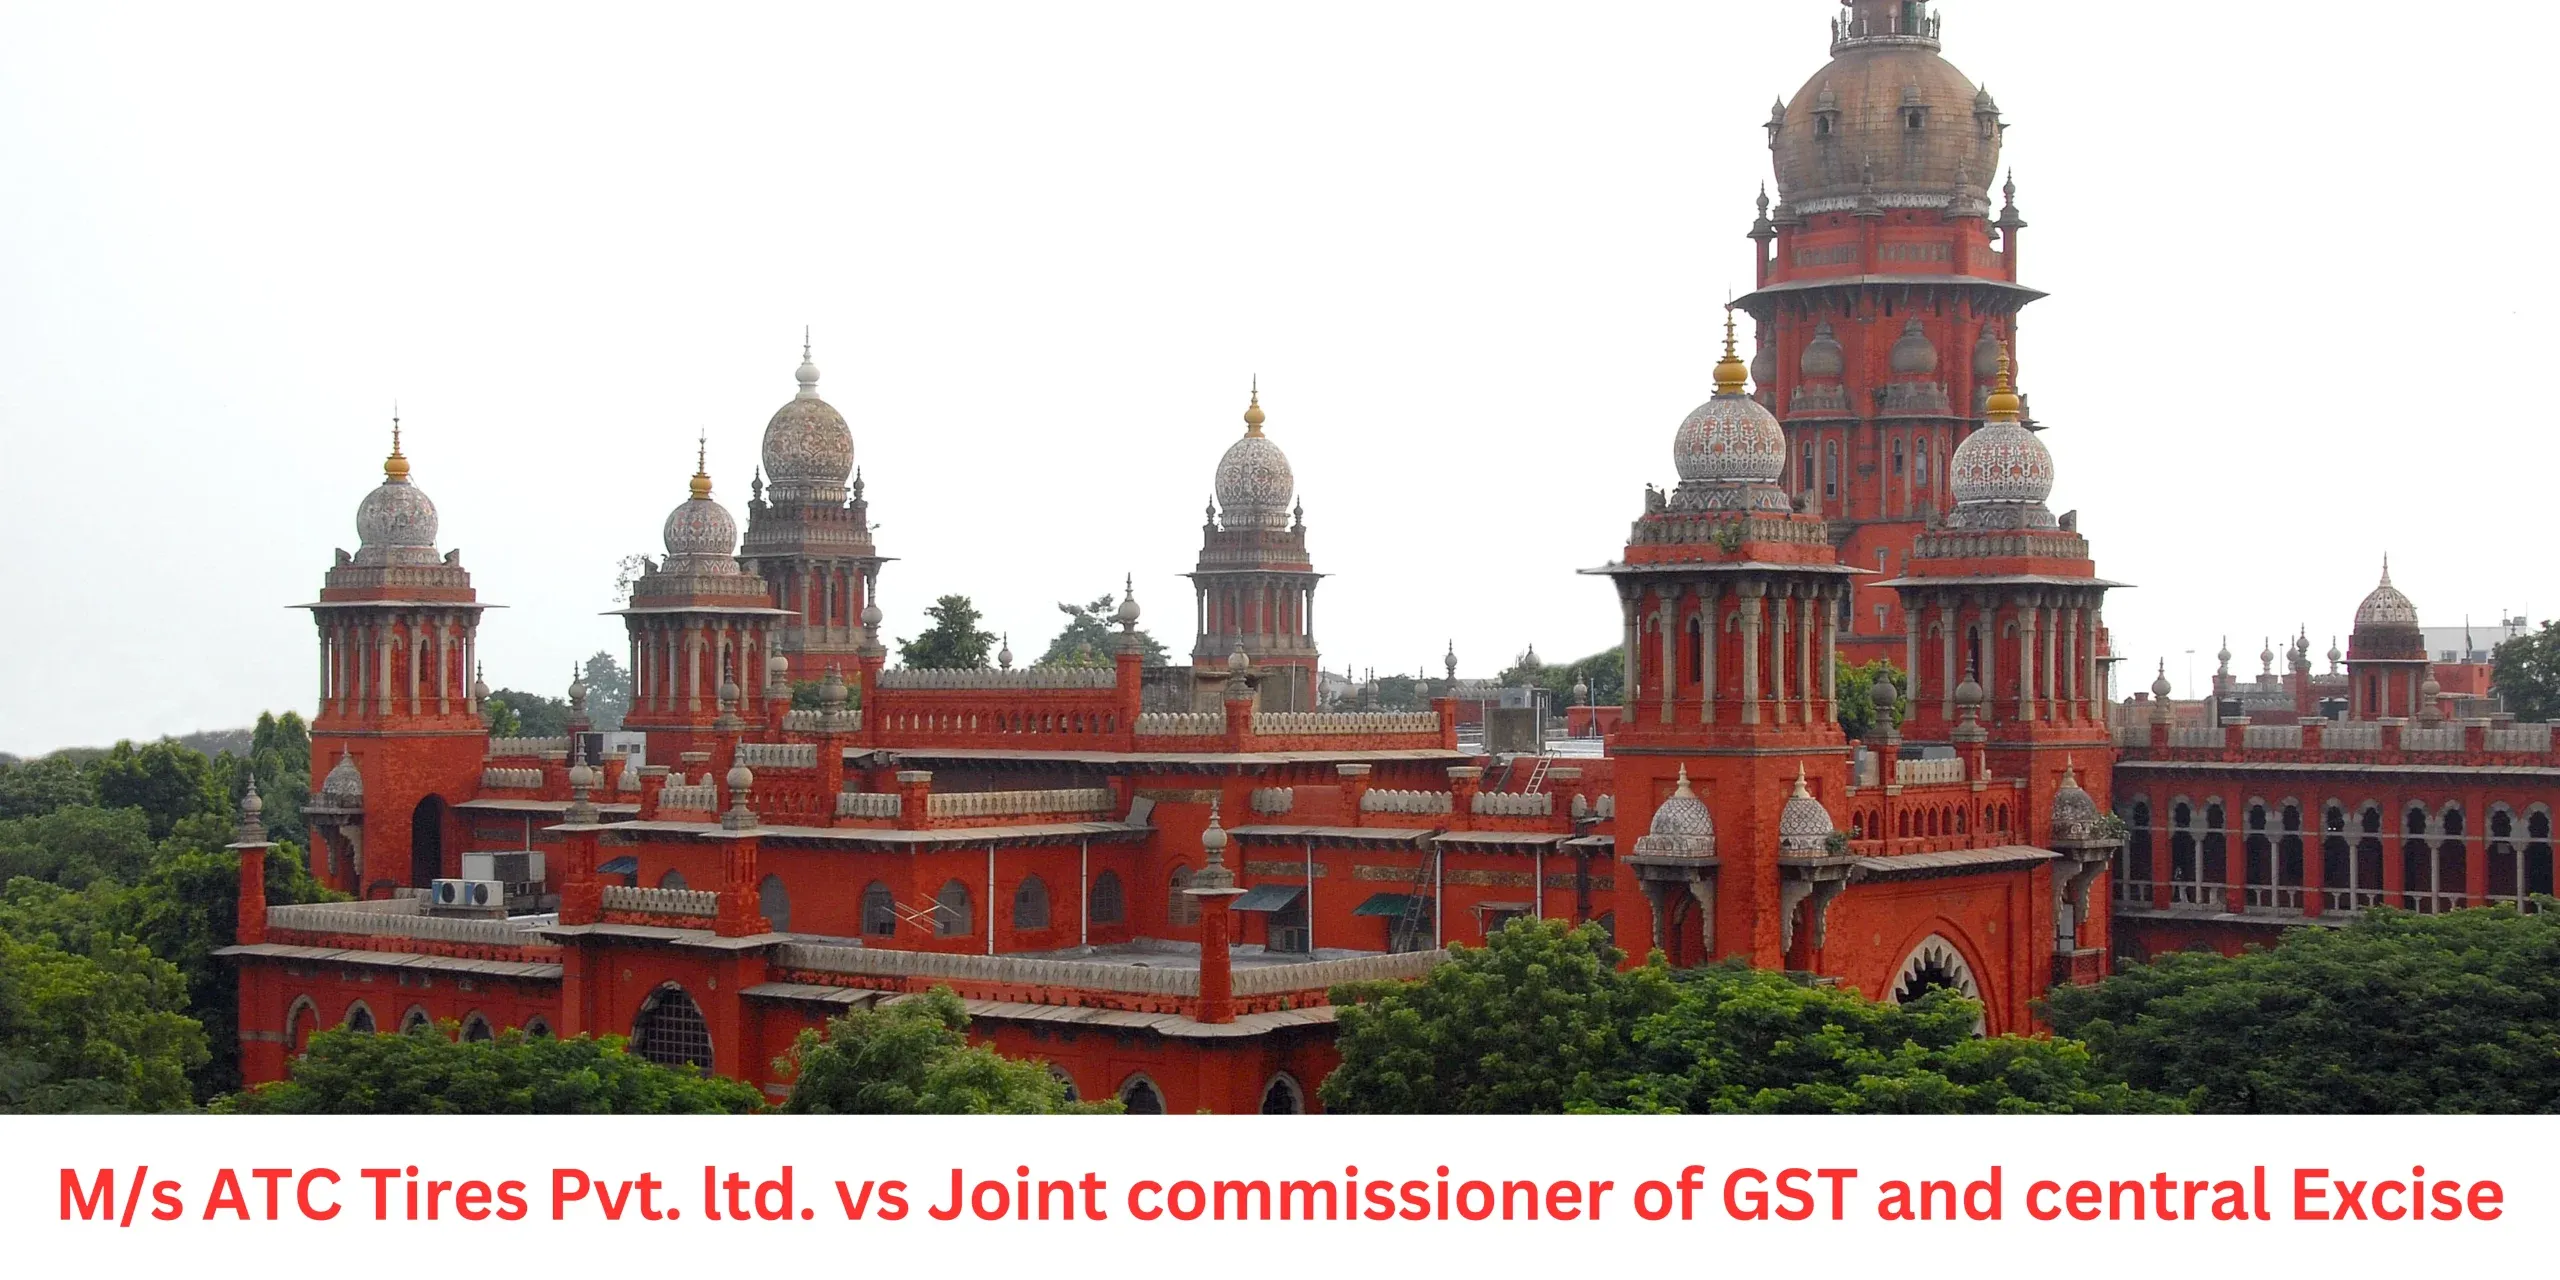 Decode the Madras HC Judgement on the case of M/s ATC Tires Pvt. ltd. vs Joint commissioner of GST and central Excise.